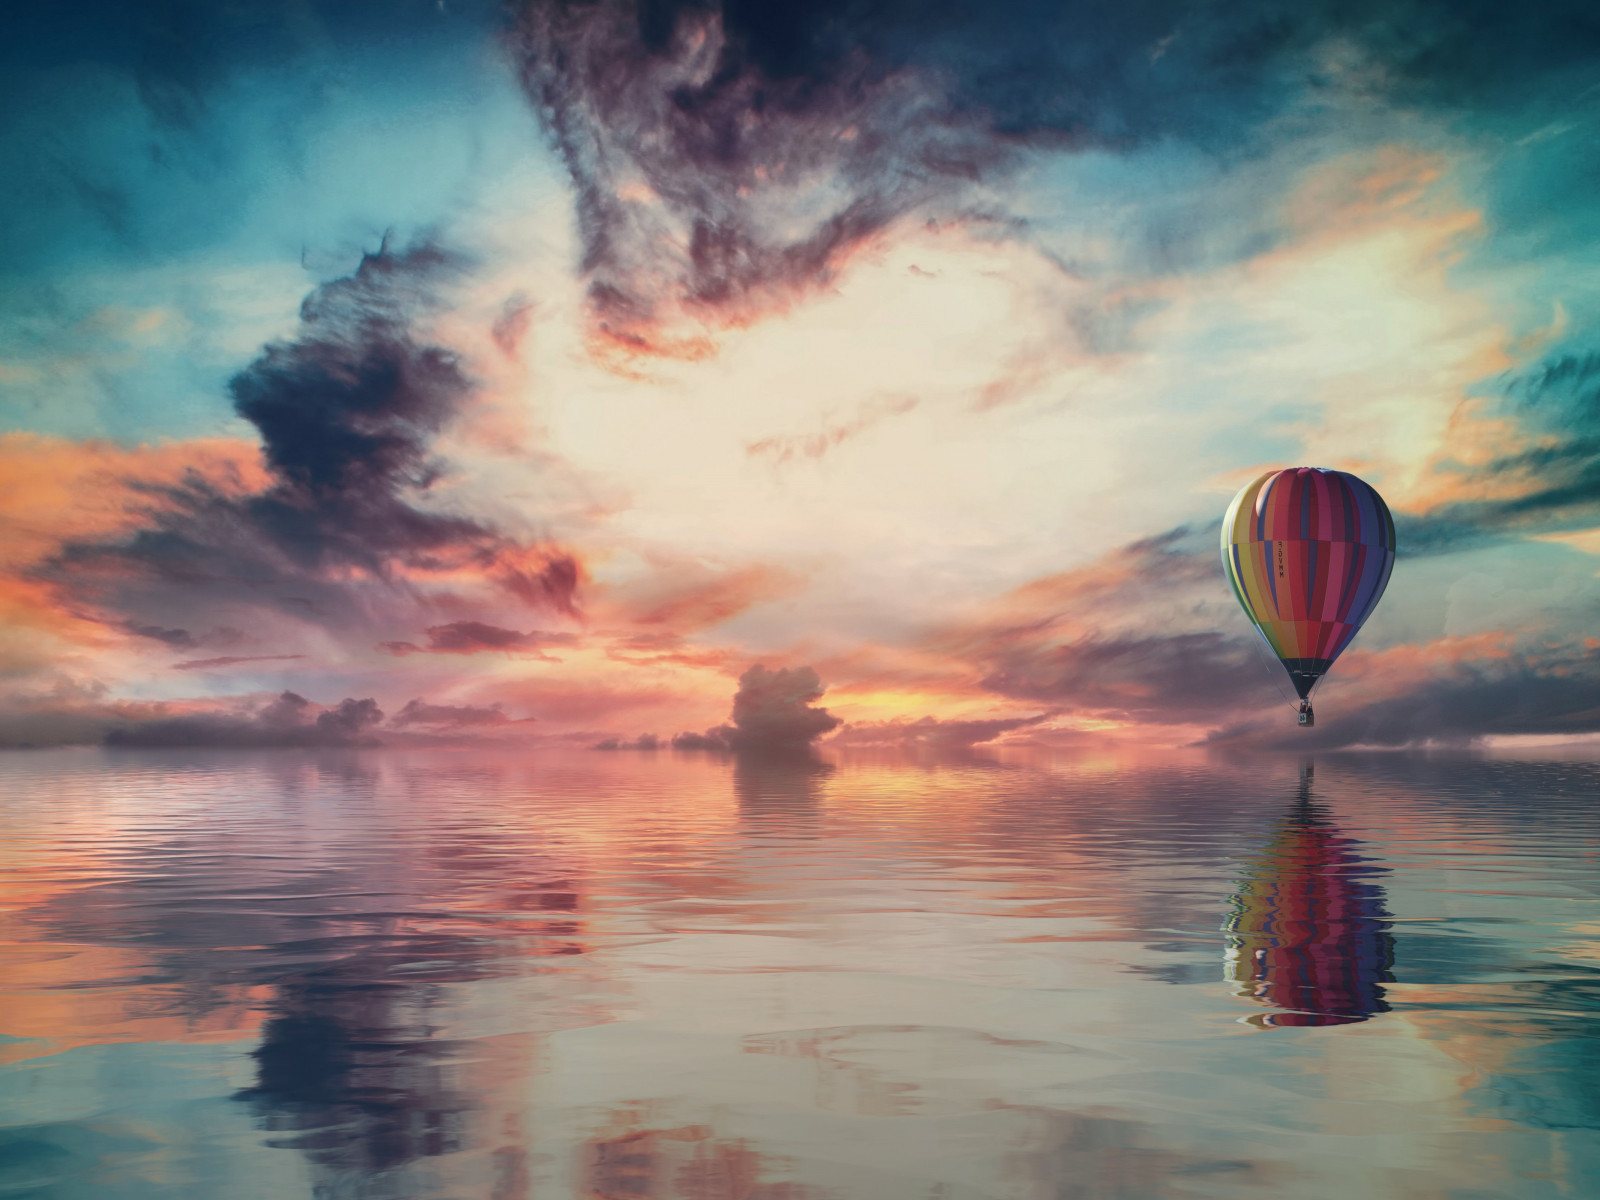 Fantasy travel with the hot air balloon wallpaper 1600x1200